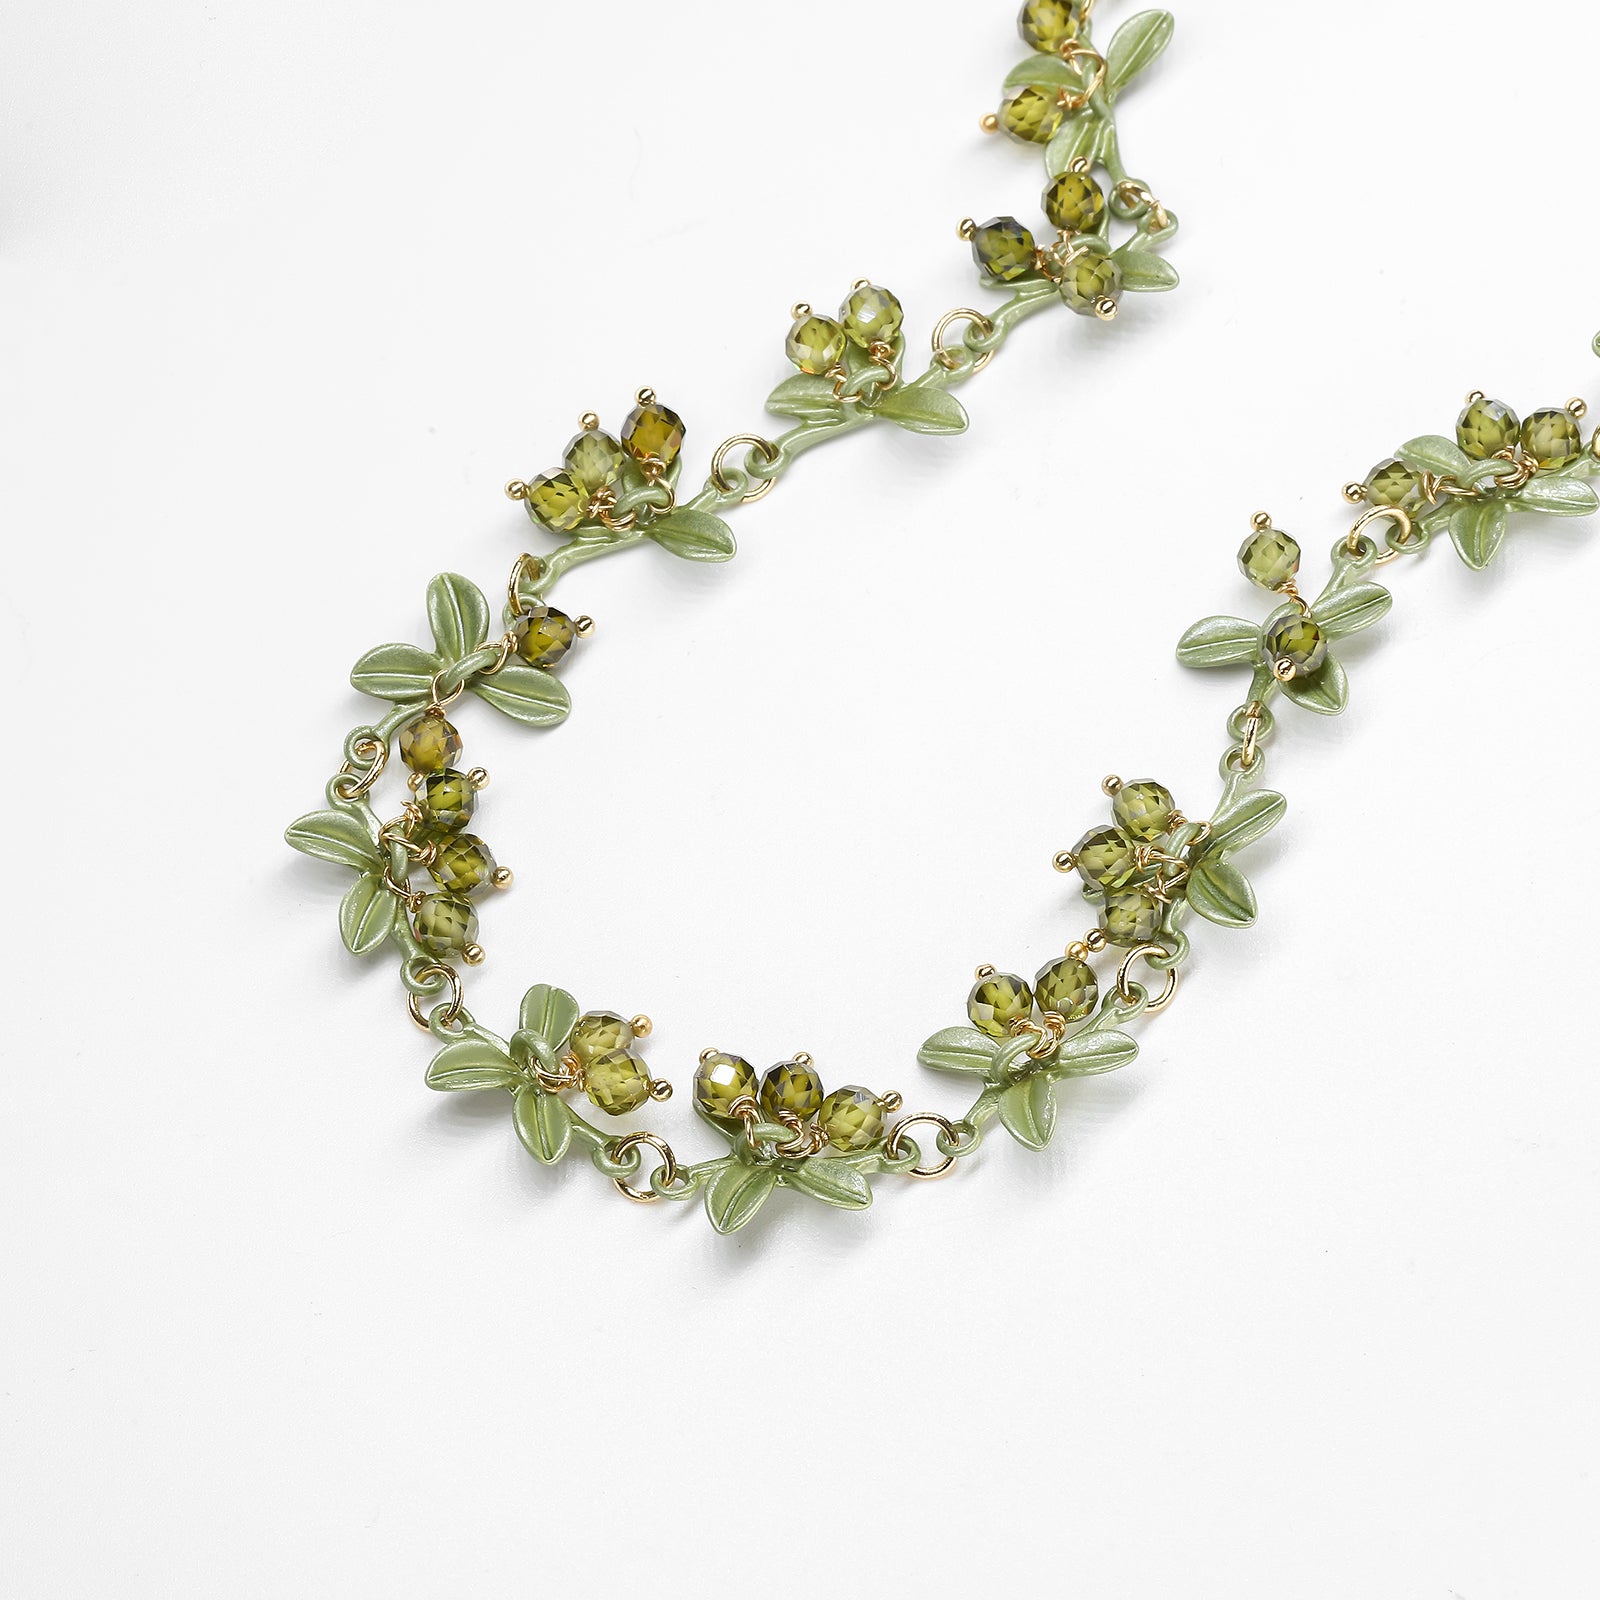 Chokeberry Leaves Necklace